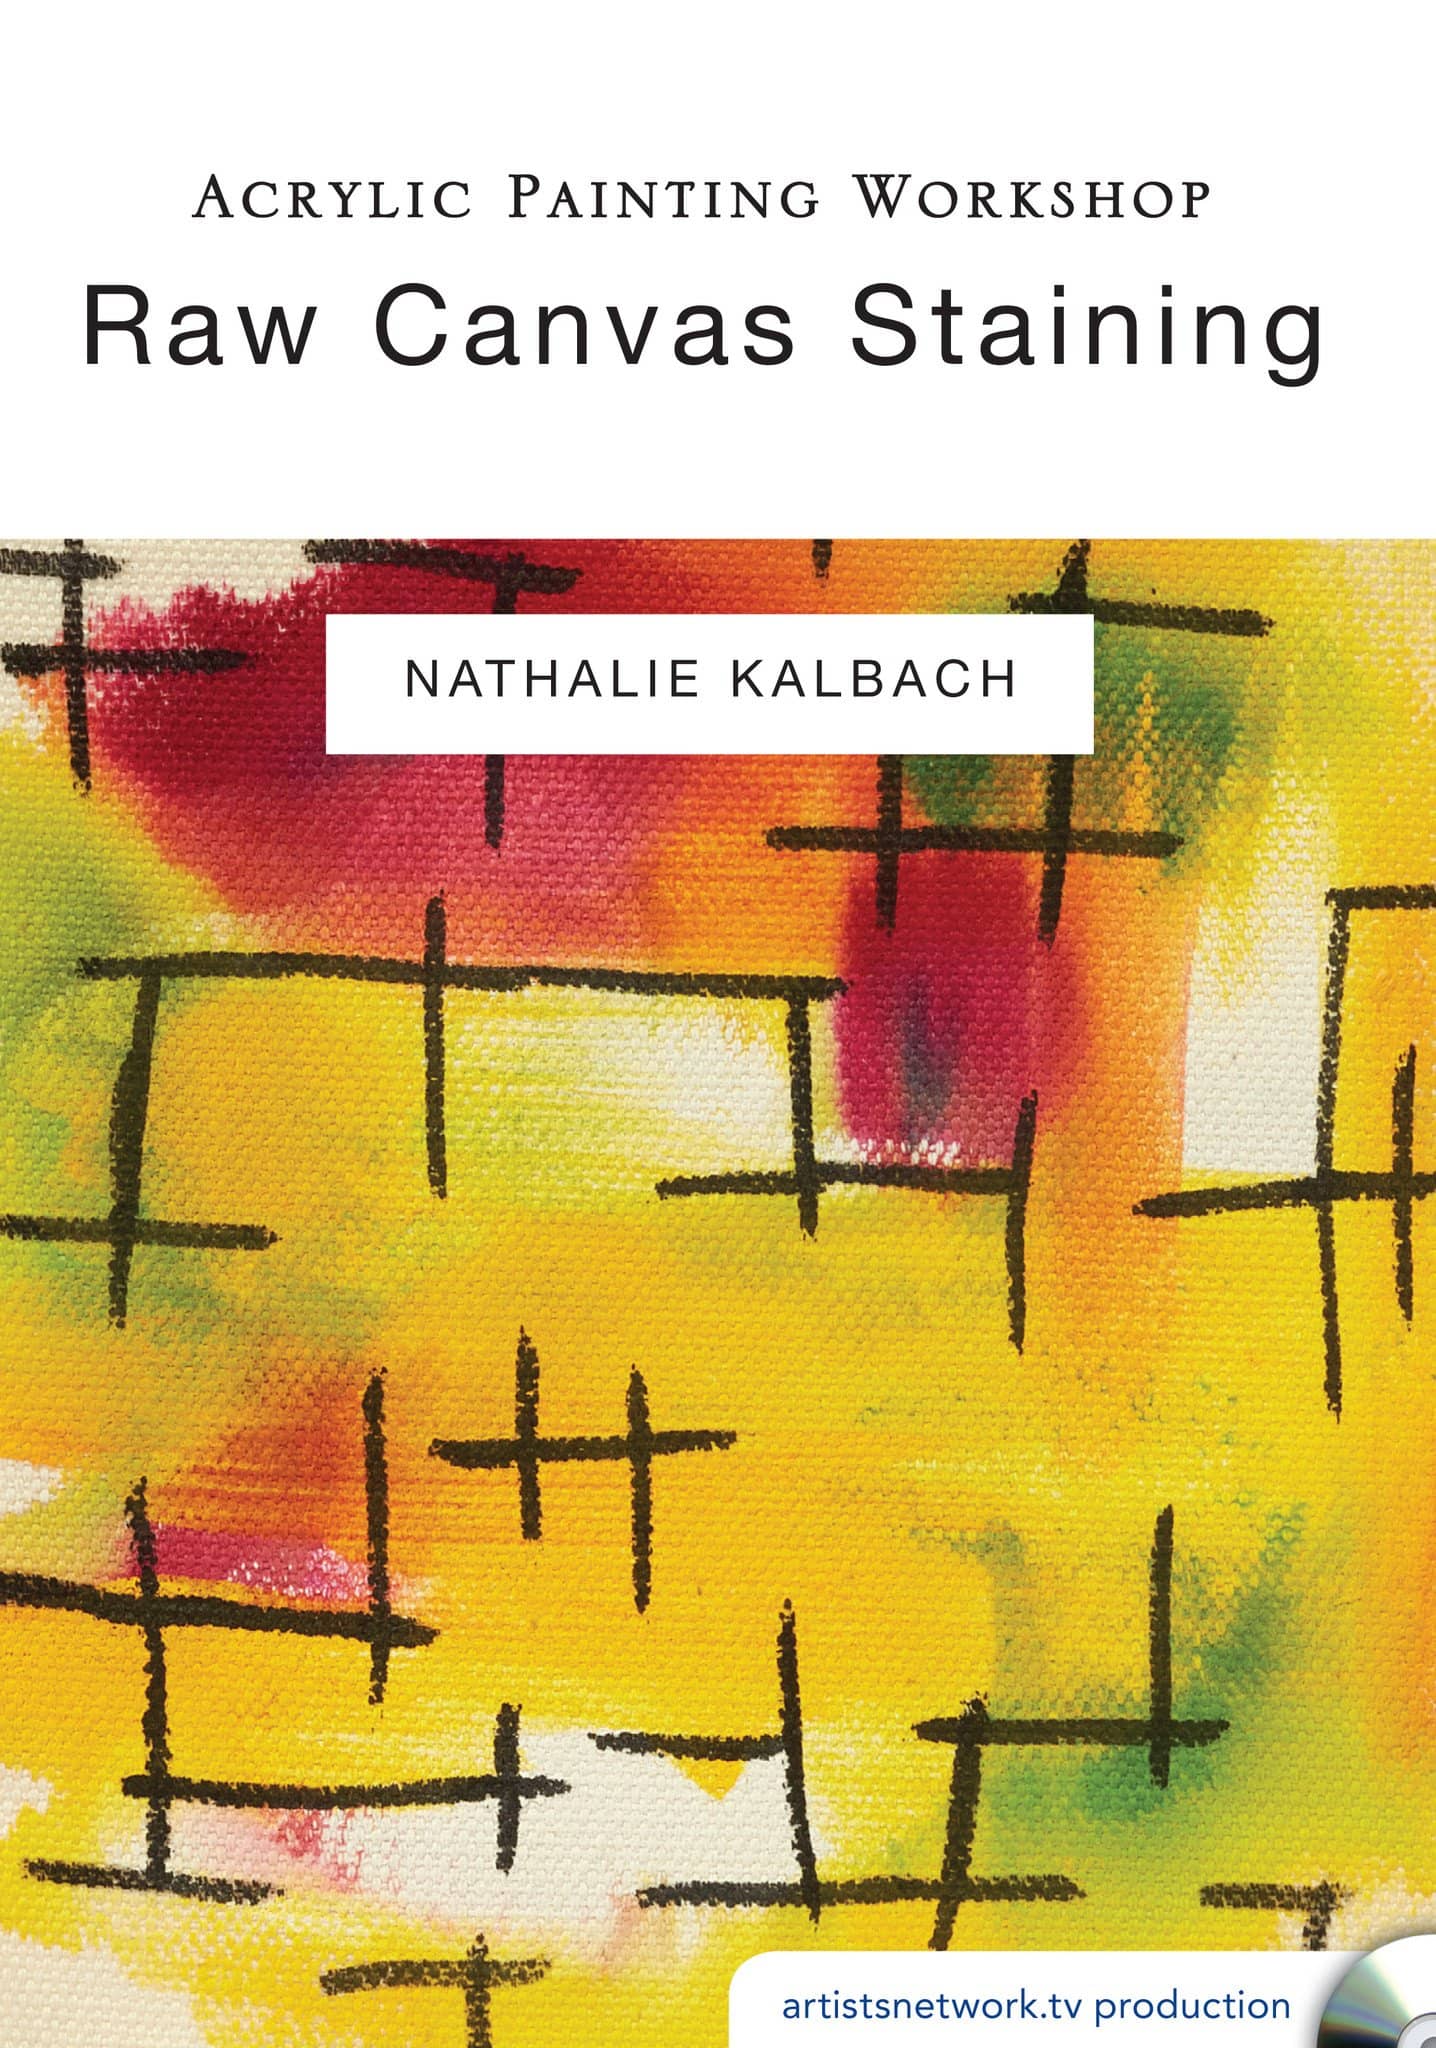 Nathalie Kalbach: Acrylic Painting Workshop - Raw Canvas Staining